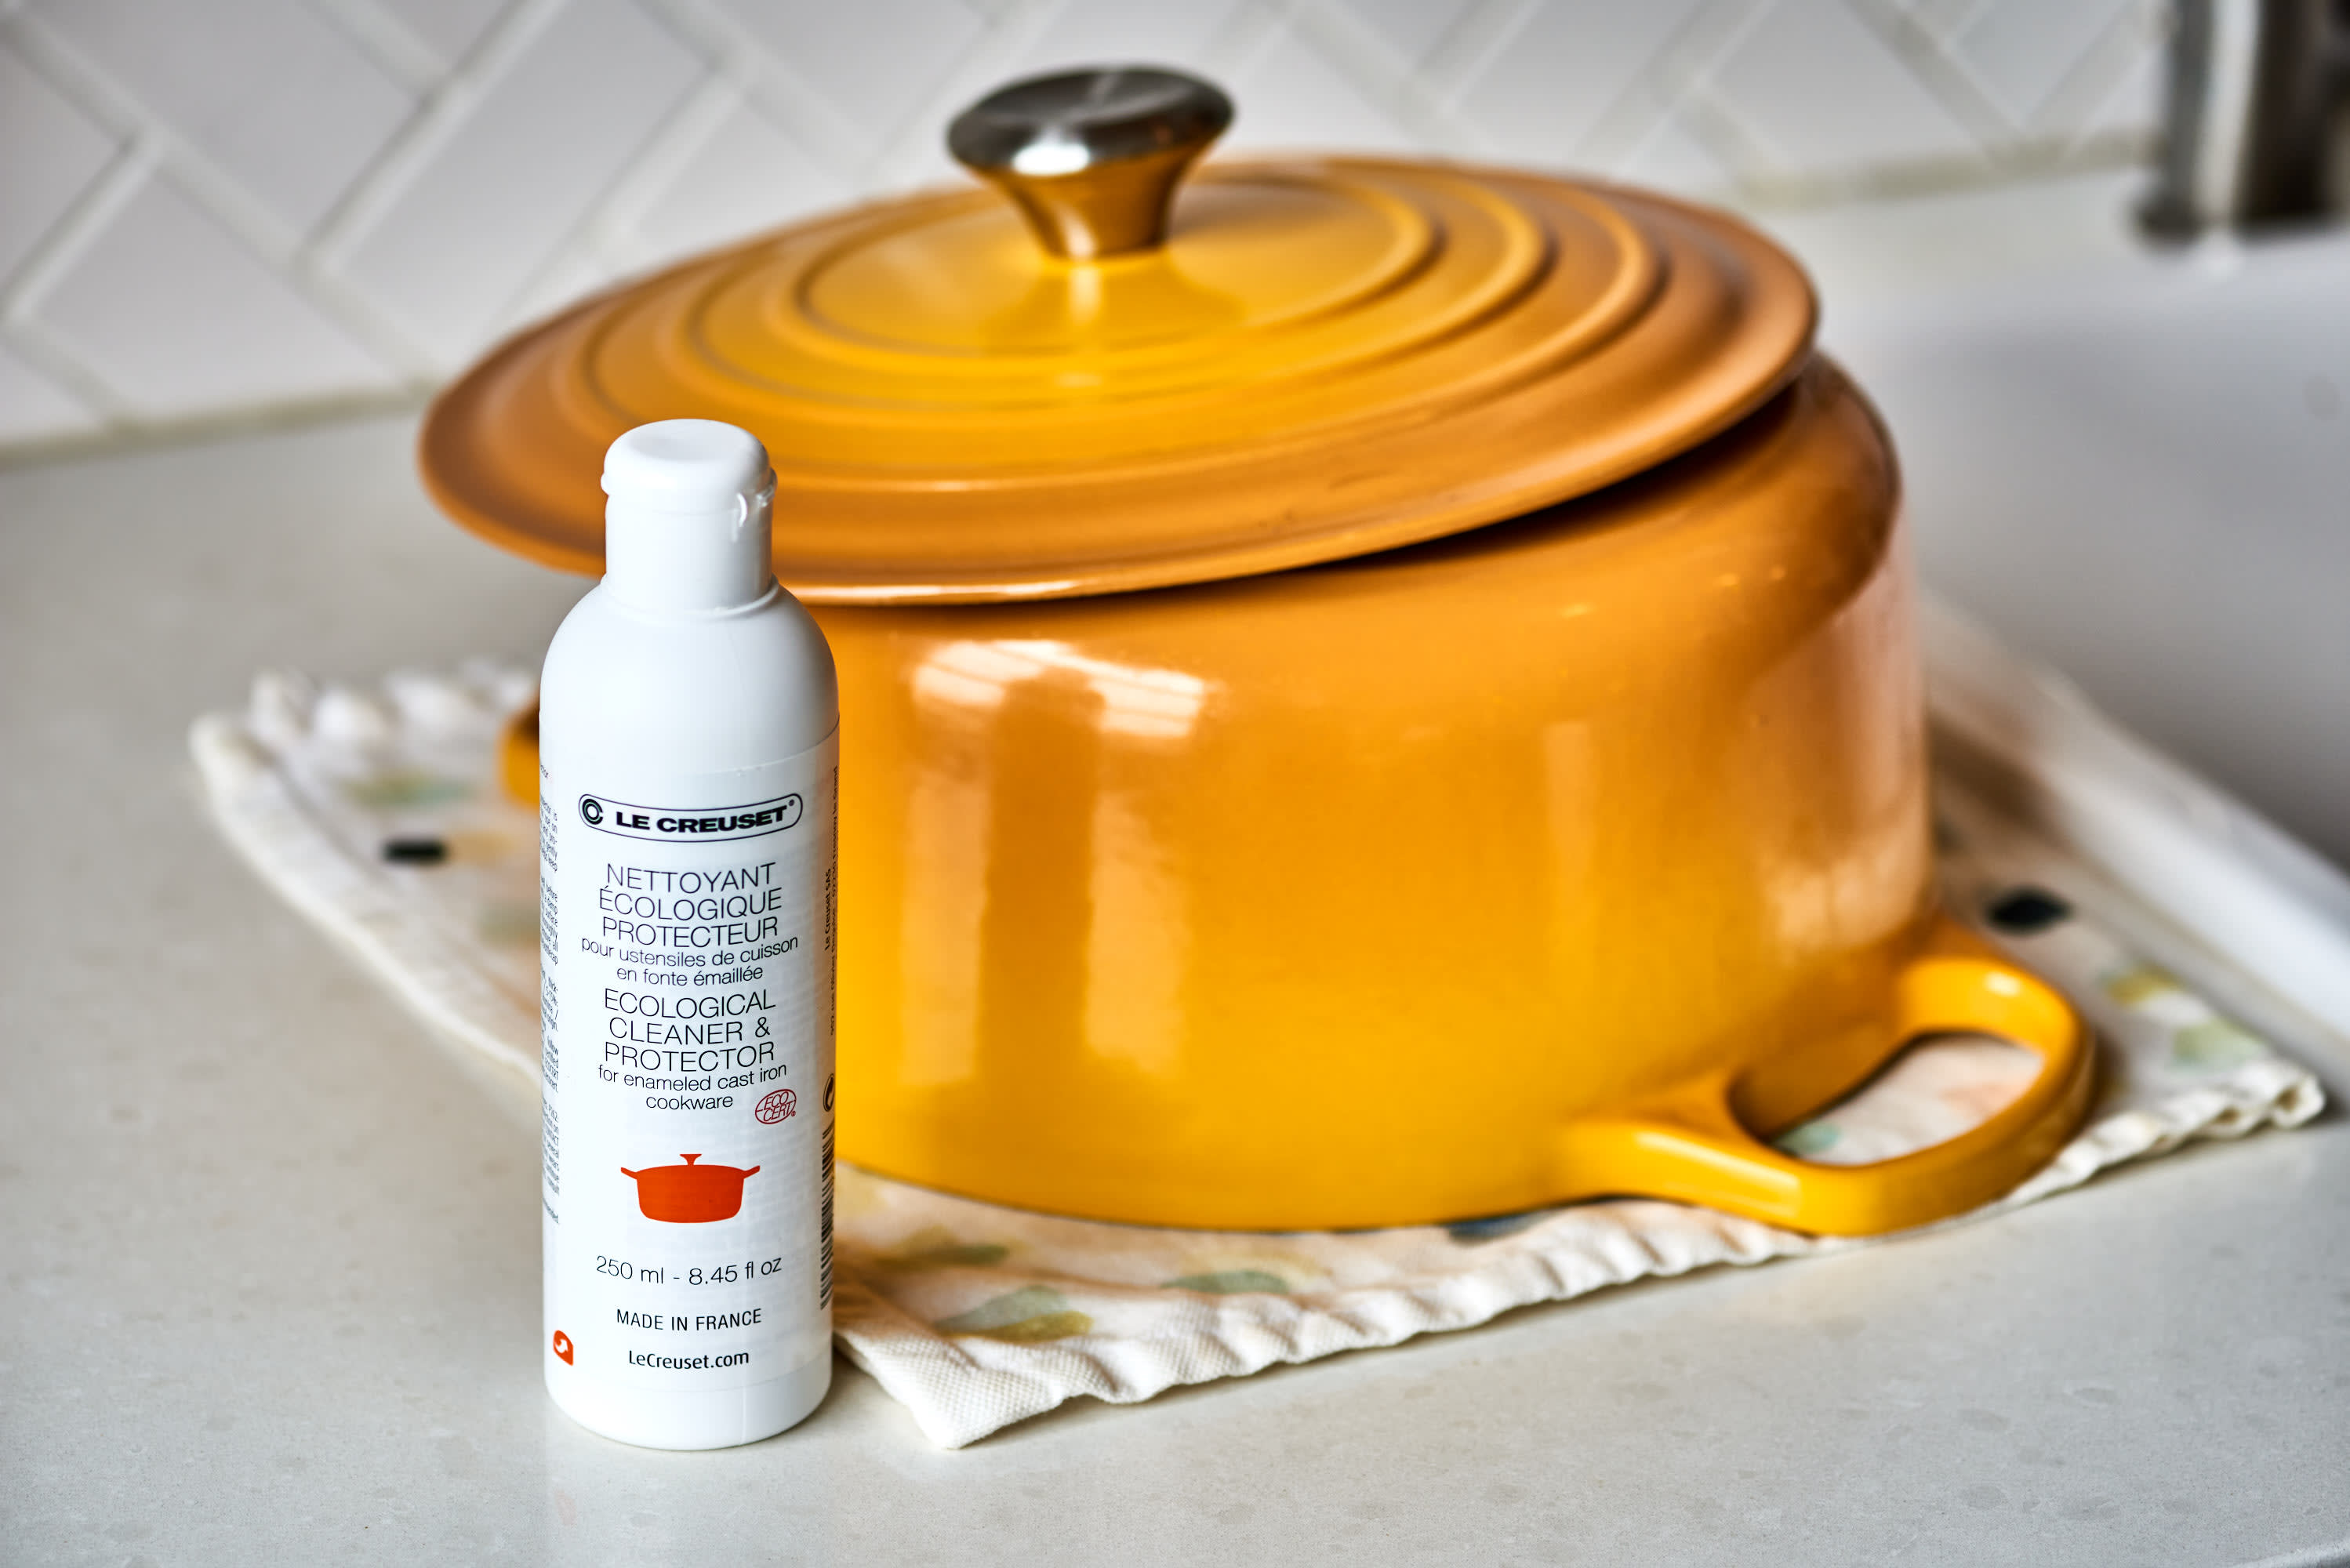 Le Creuset Cast Iron Cookware Cleaner